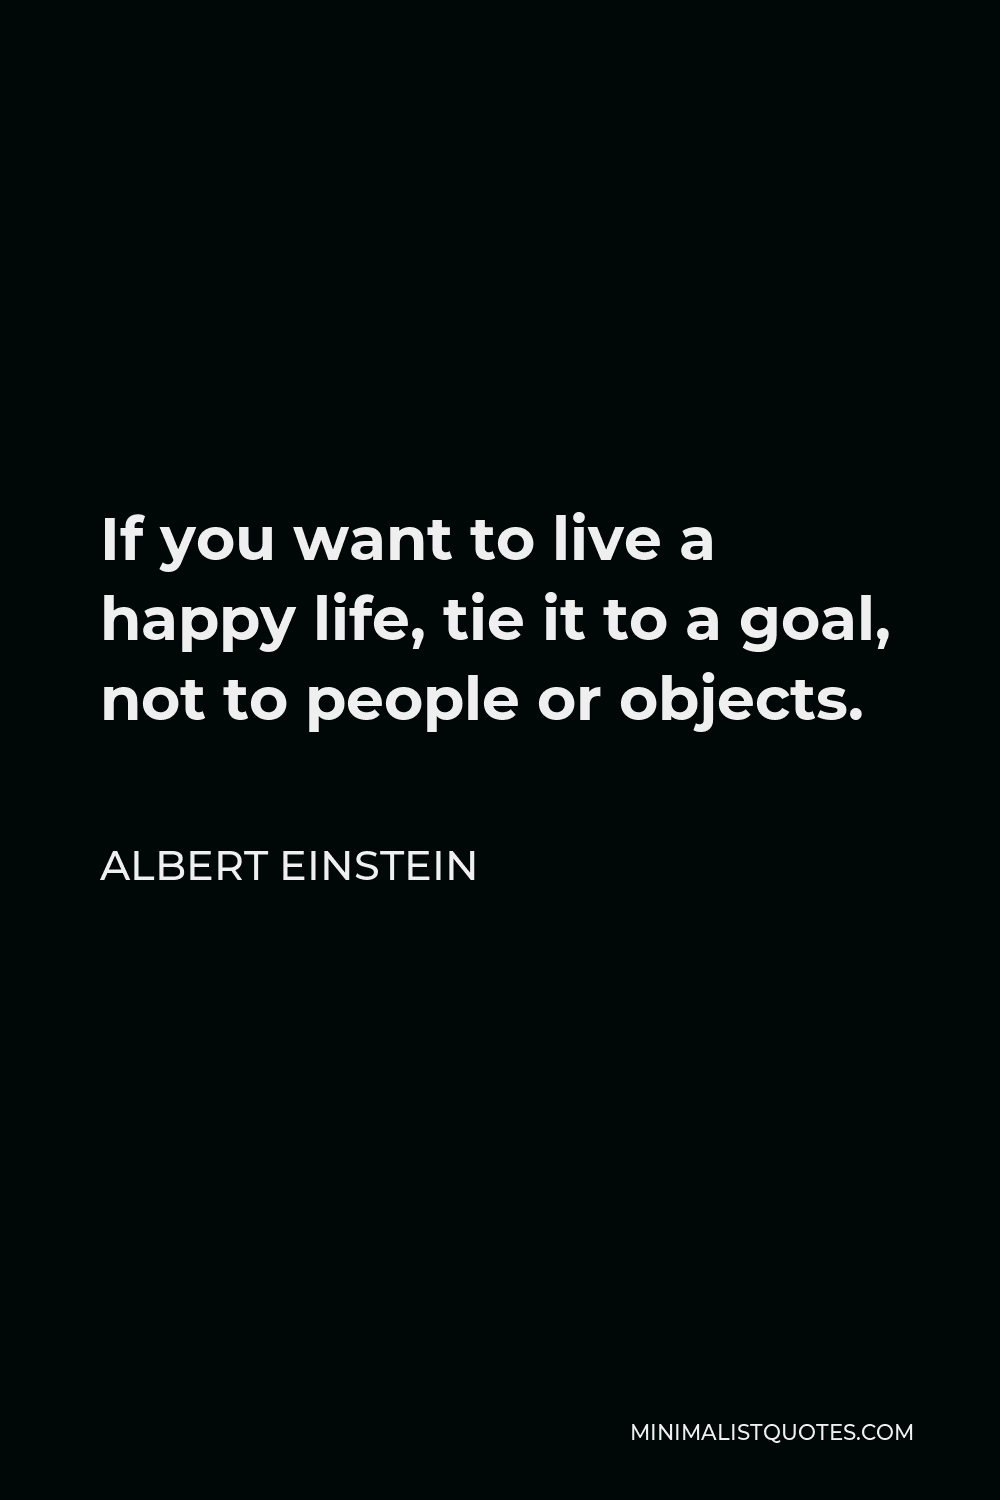 Albert Einstein Quote - If you want to live a happy life, tie it to a goal, not to people or objects.